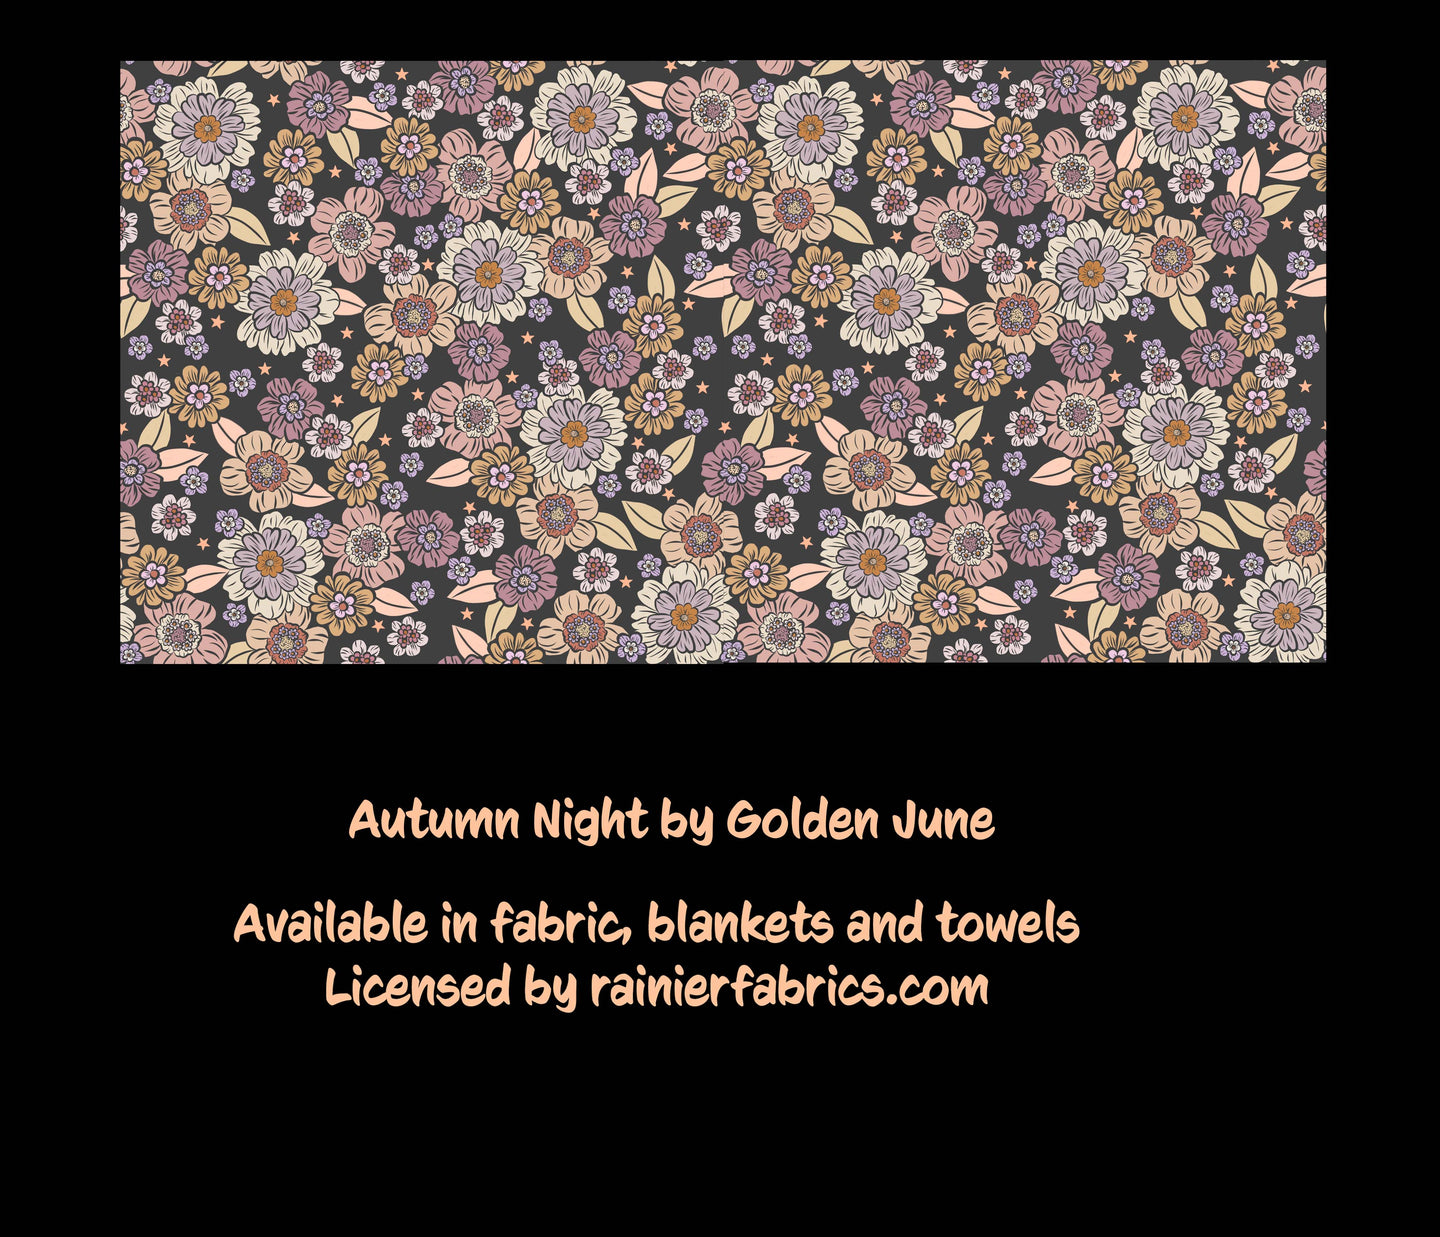 Autumn Night- designed by Golden June - Order by 1/2 yard; Description of bases below